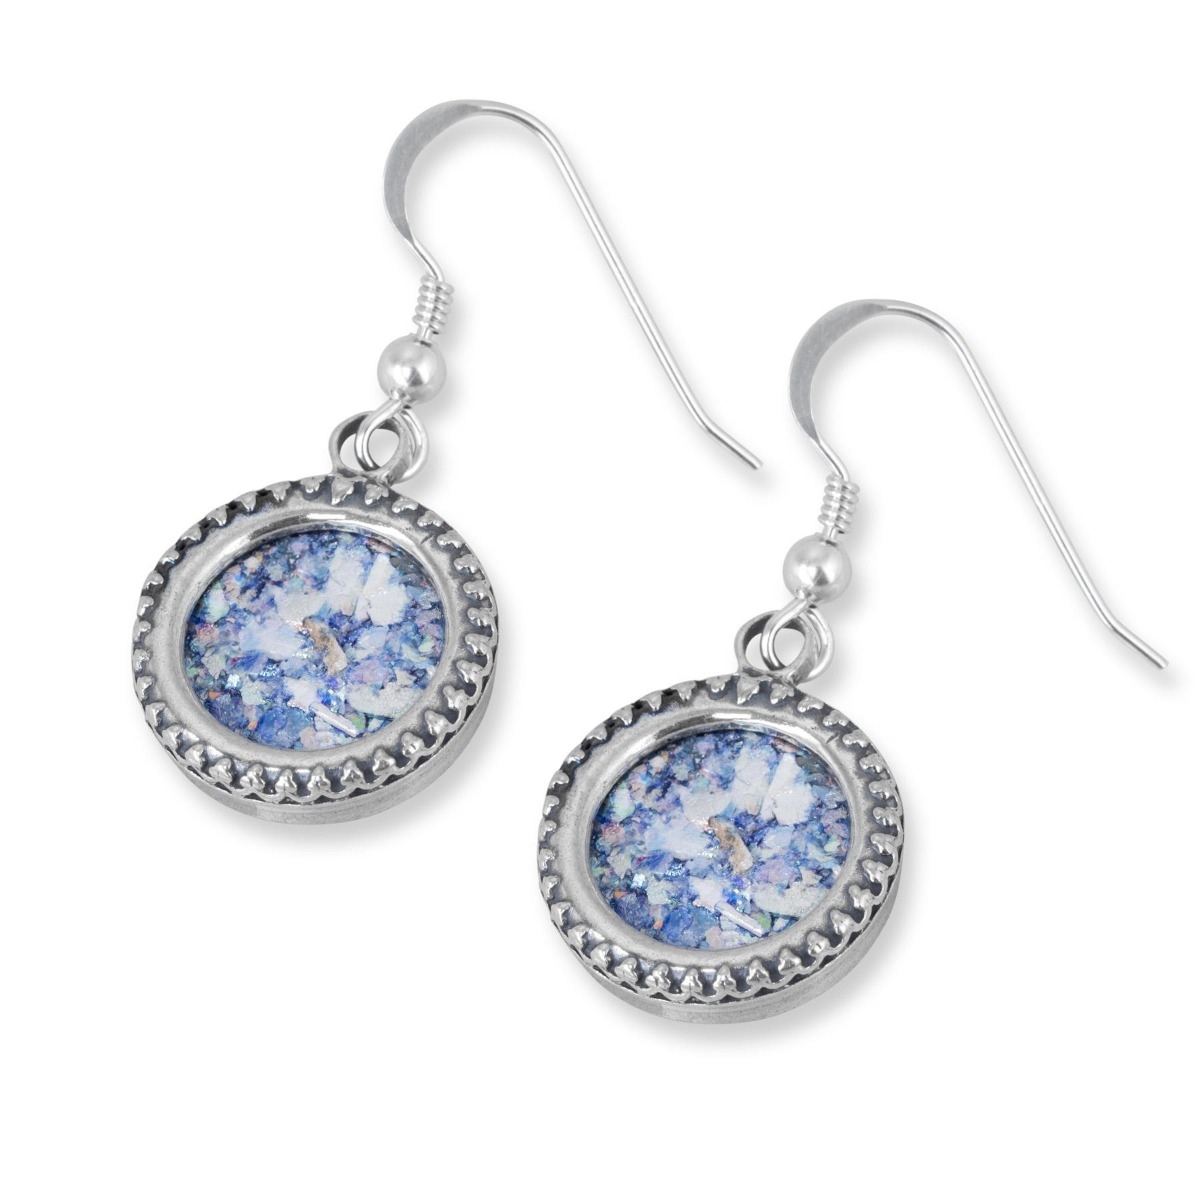 Sterling Silver and Roman Glass Filigree Round Hanging Earrings - 1